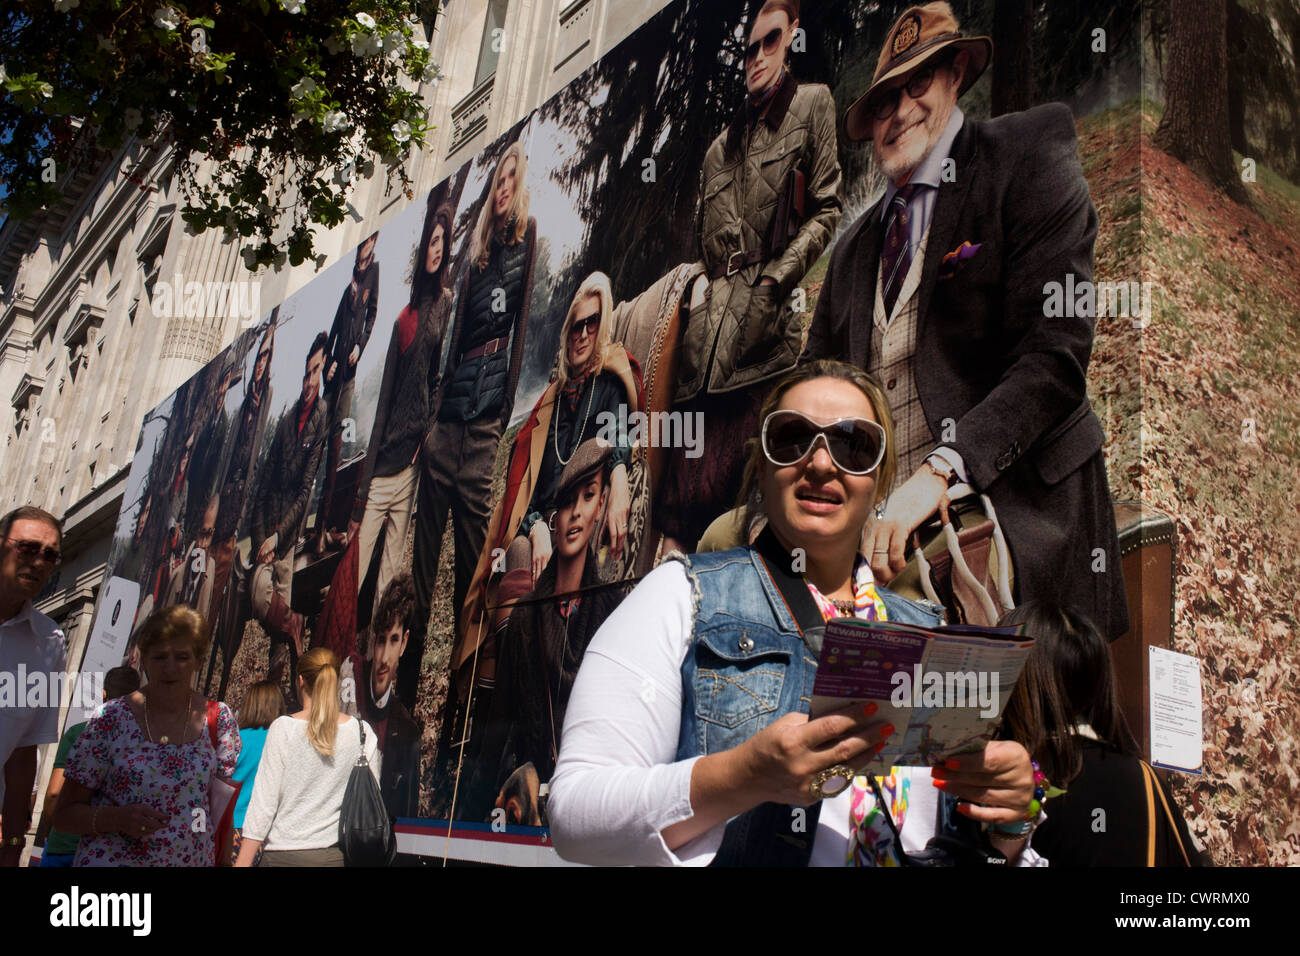 Woman passes below a billboard for clothing retailer Tommy Hilfiger showing the wealthy classes in a country setting. Stock Photo